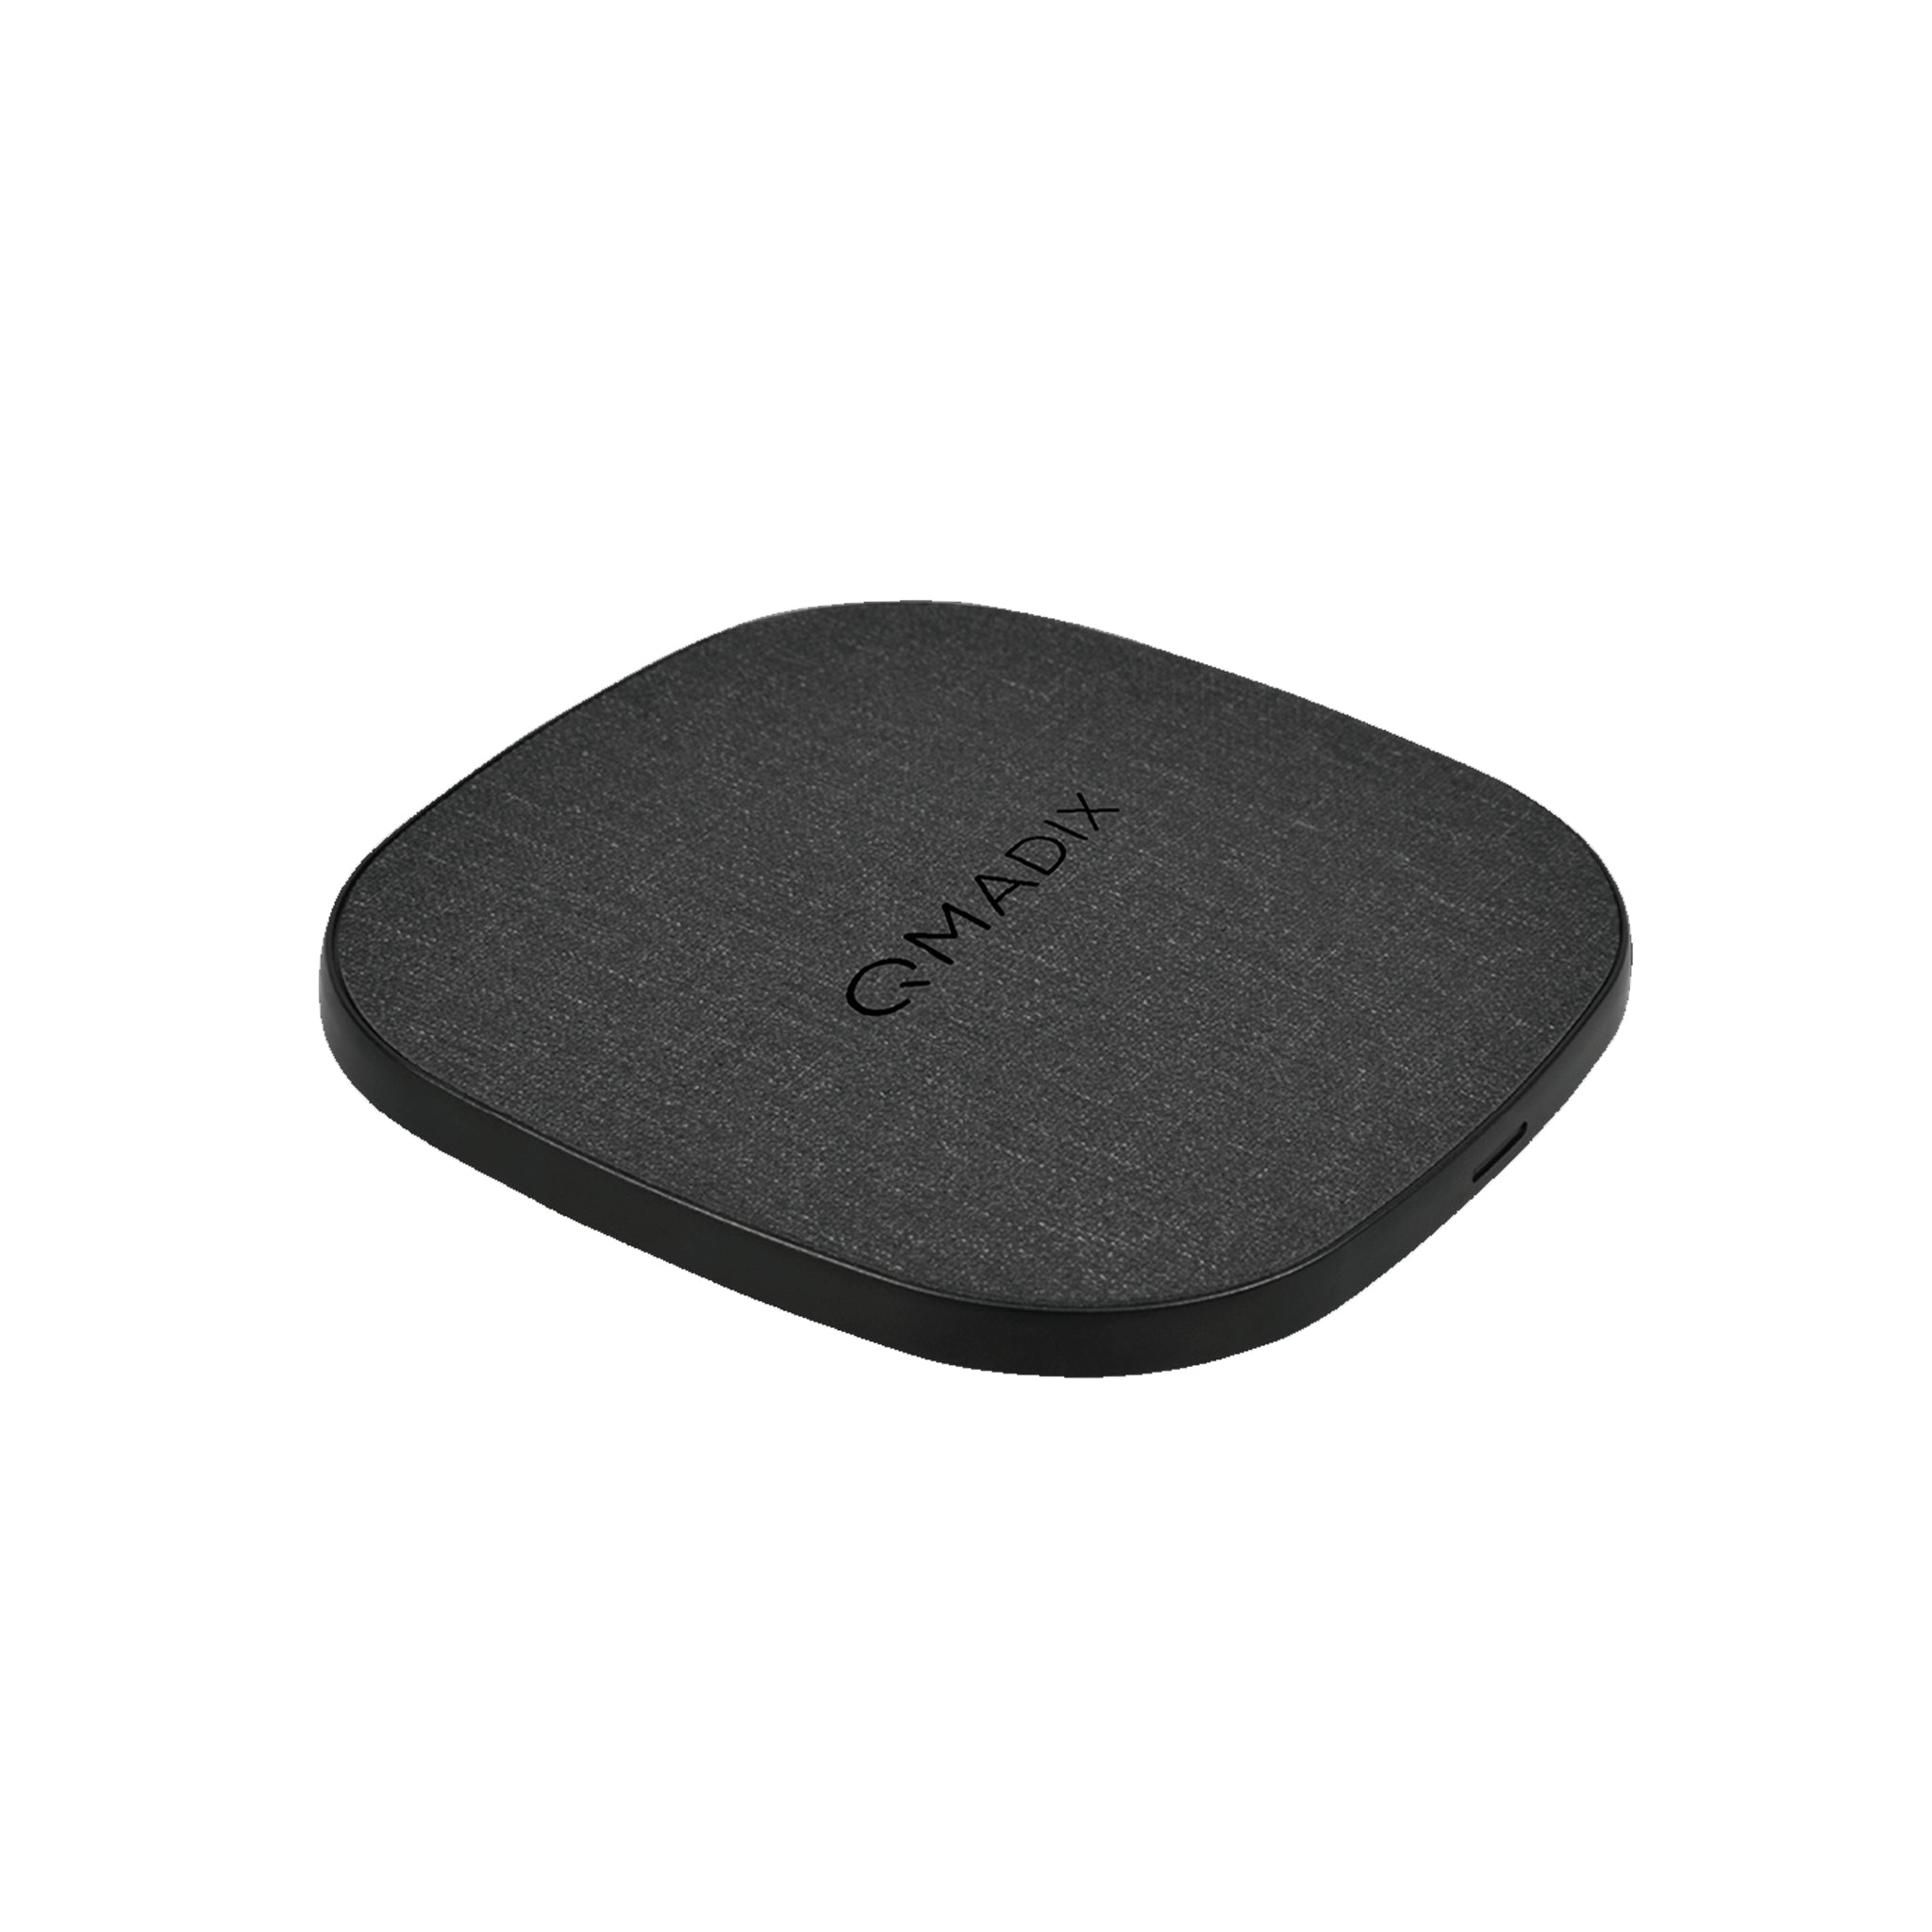 Qmadix - Quick Charge 3.0 Wireless Charging Pad 10w With Wall Charger - Black